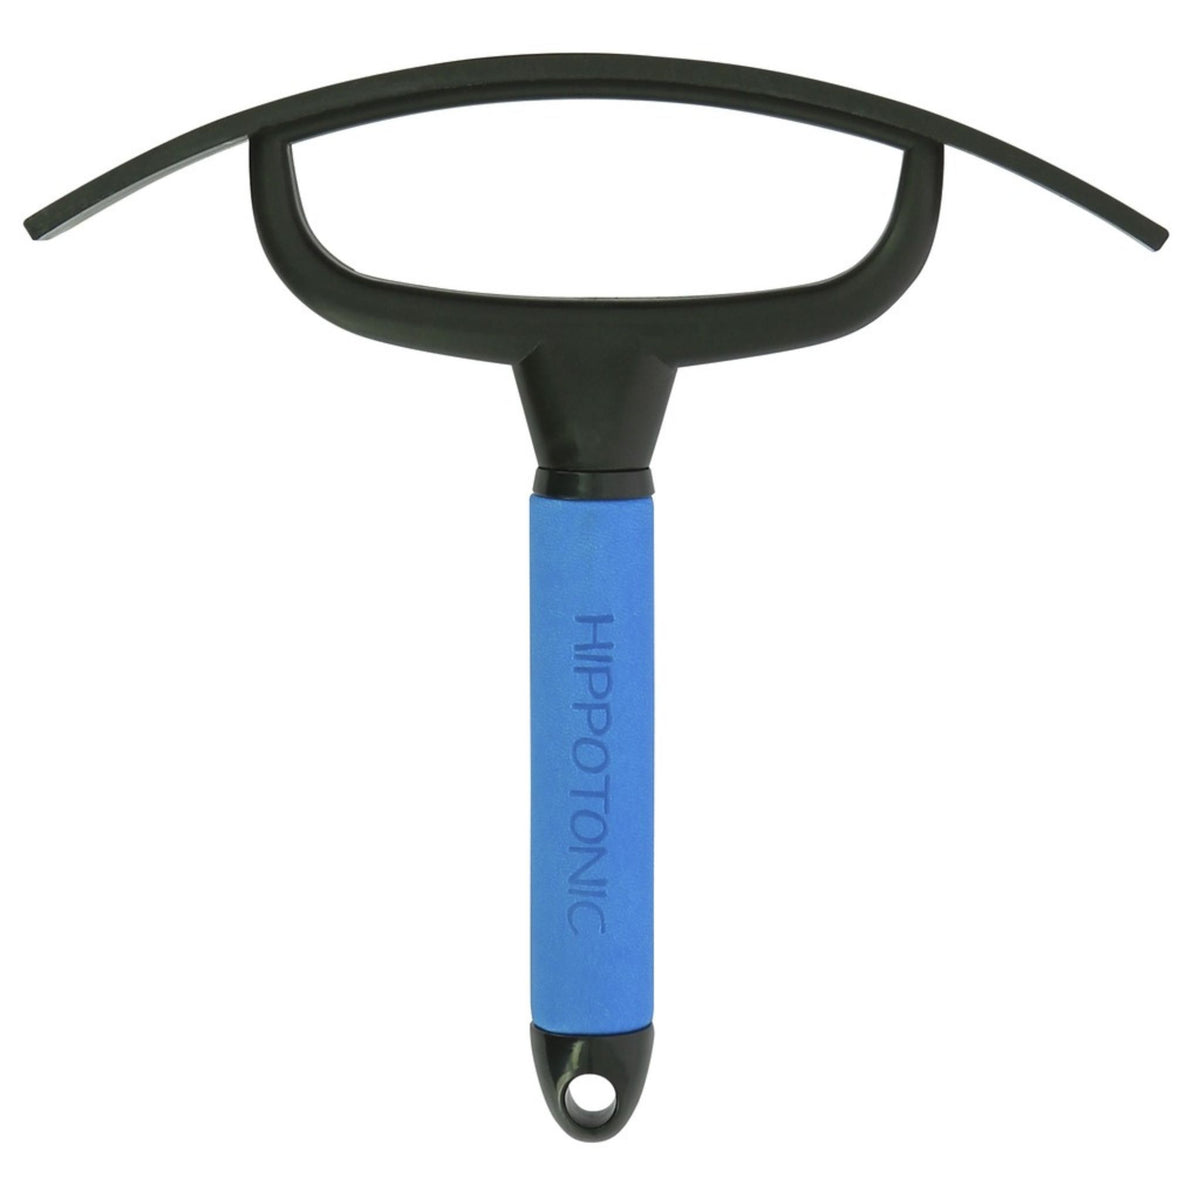 Black sweat scraper with a blue leather handle indented with “Hippotonic”.